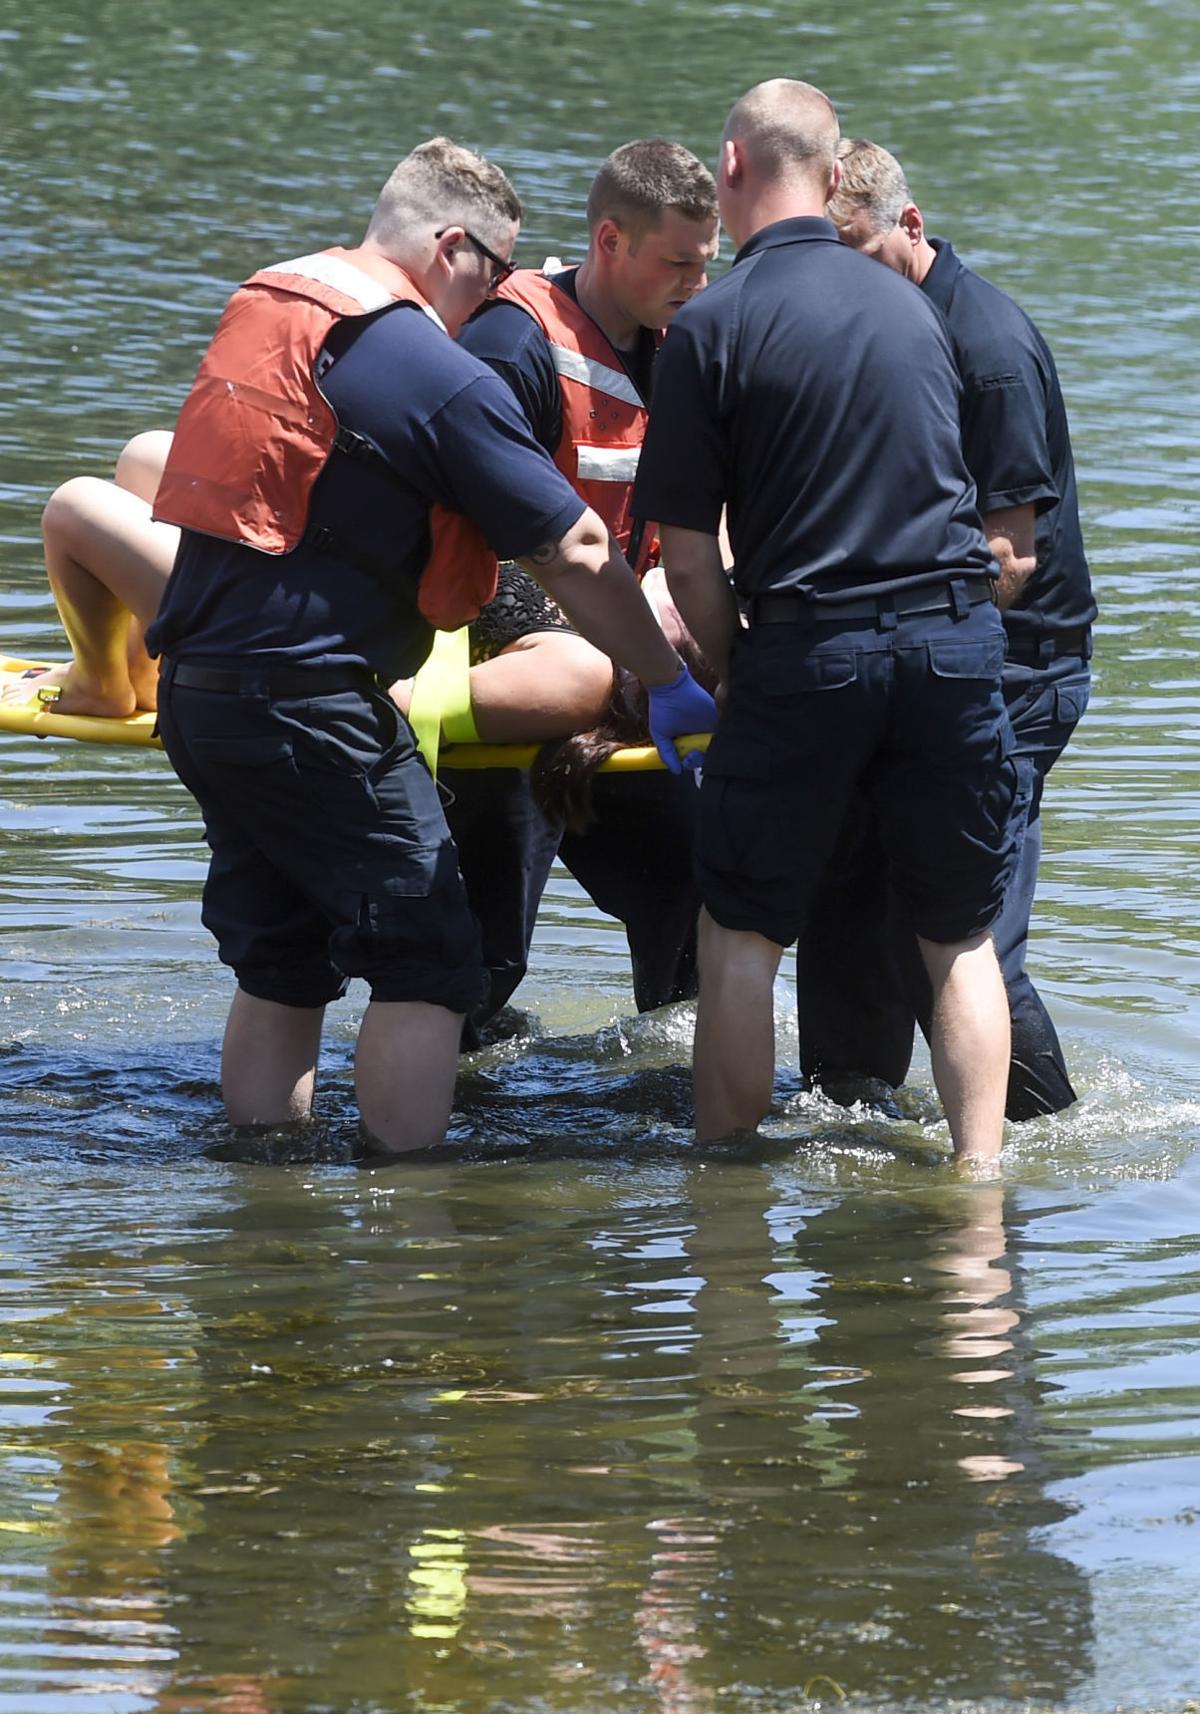 Teen injured after fall from cliff at Quarry Lake Park | Local News ...